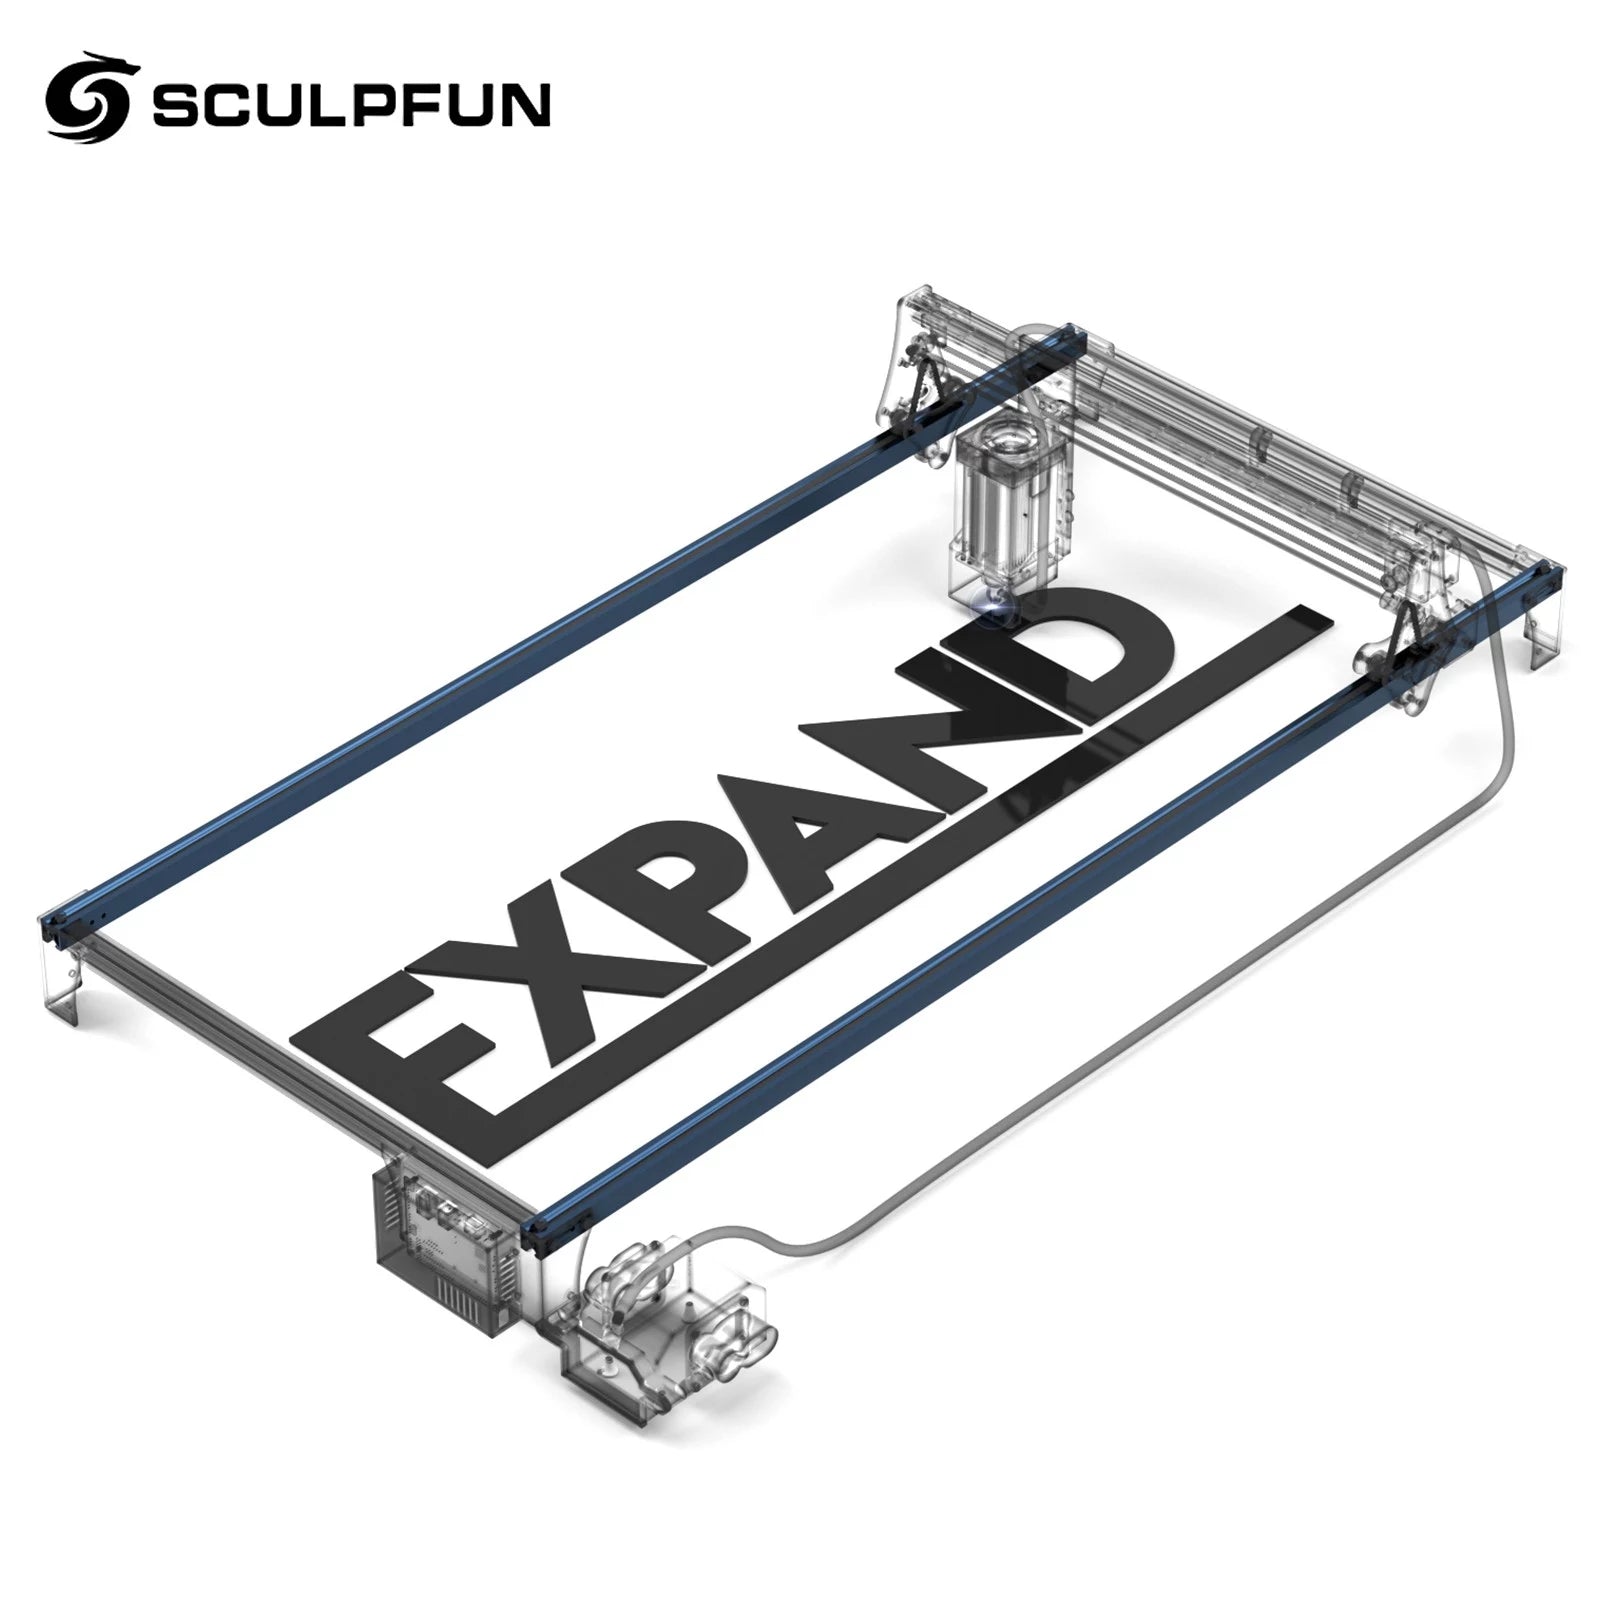 Sculpfun Engraver Engraving Area Expansion Kit for S6/S6pro/S9